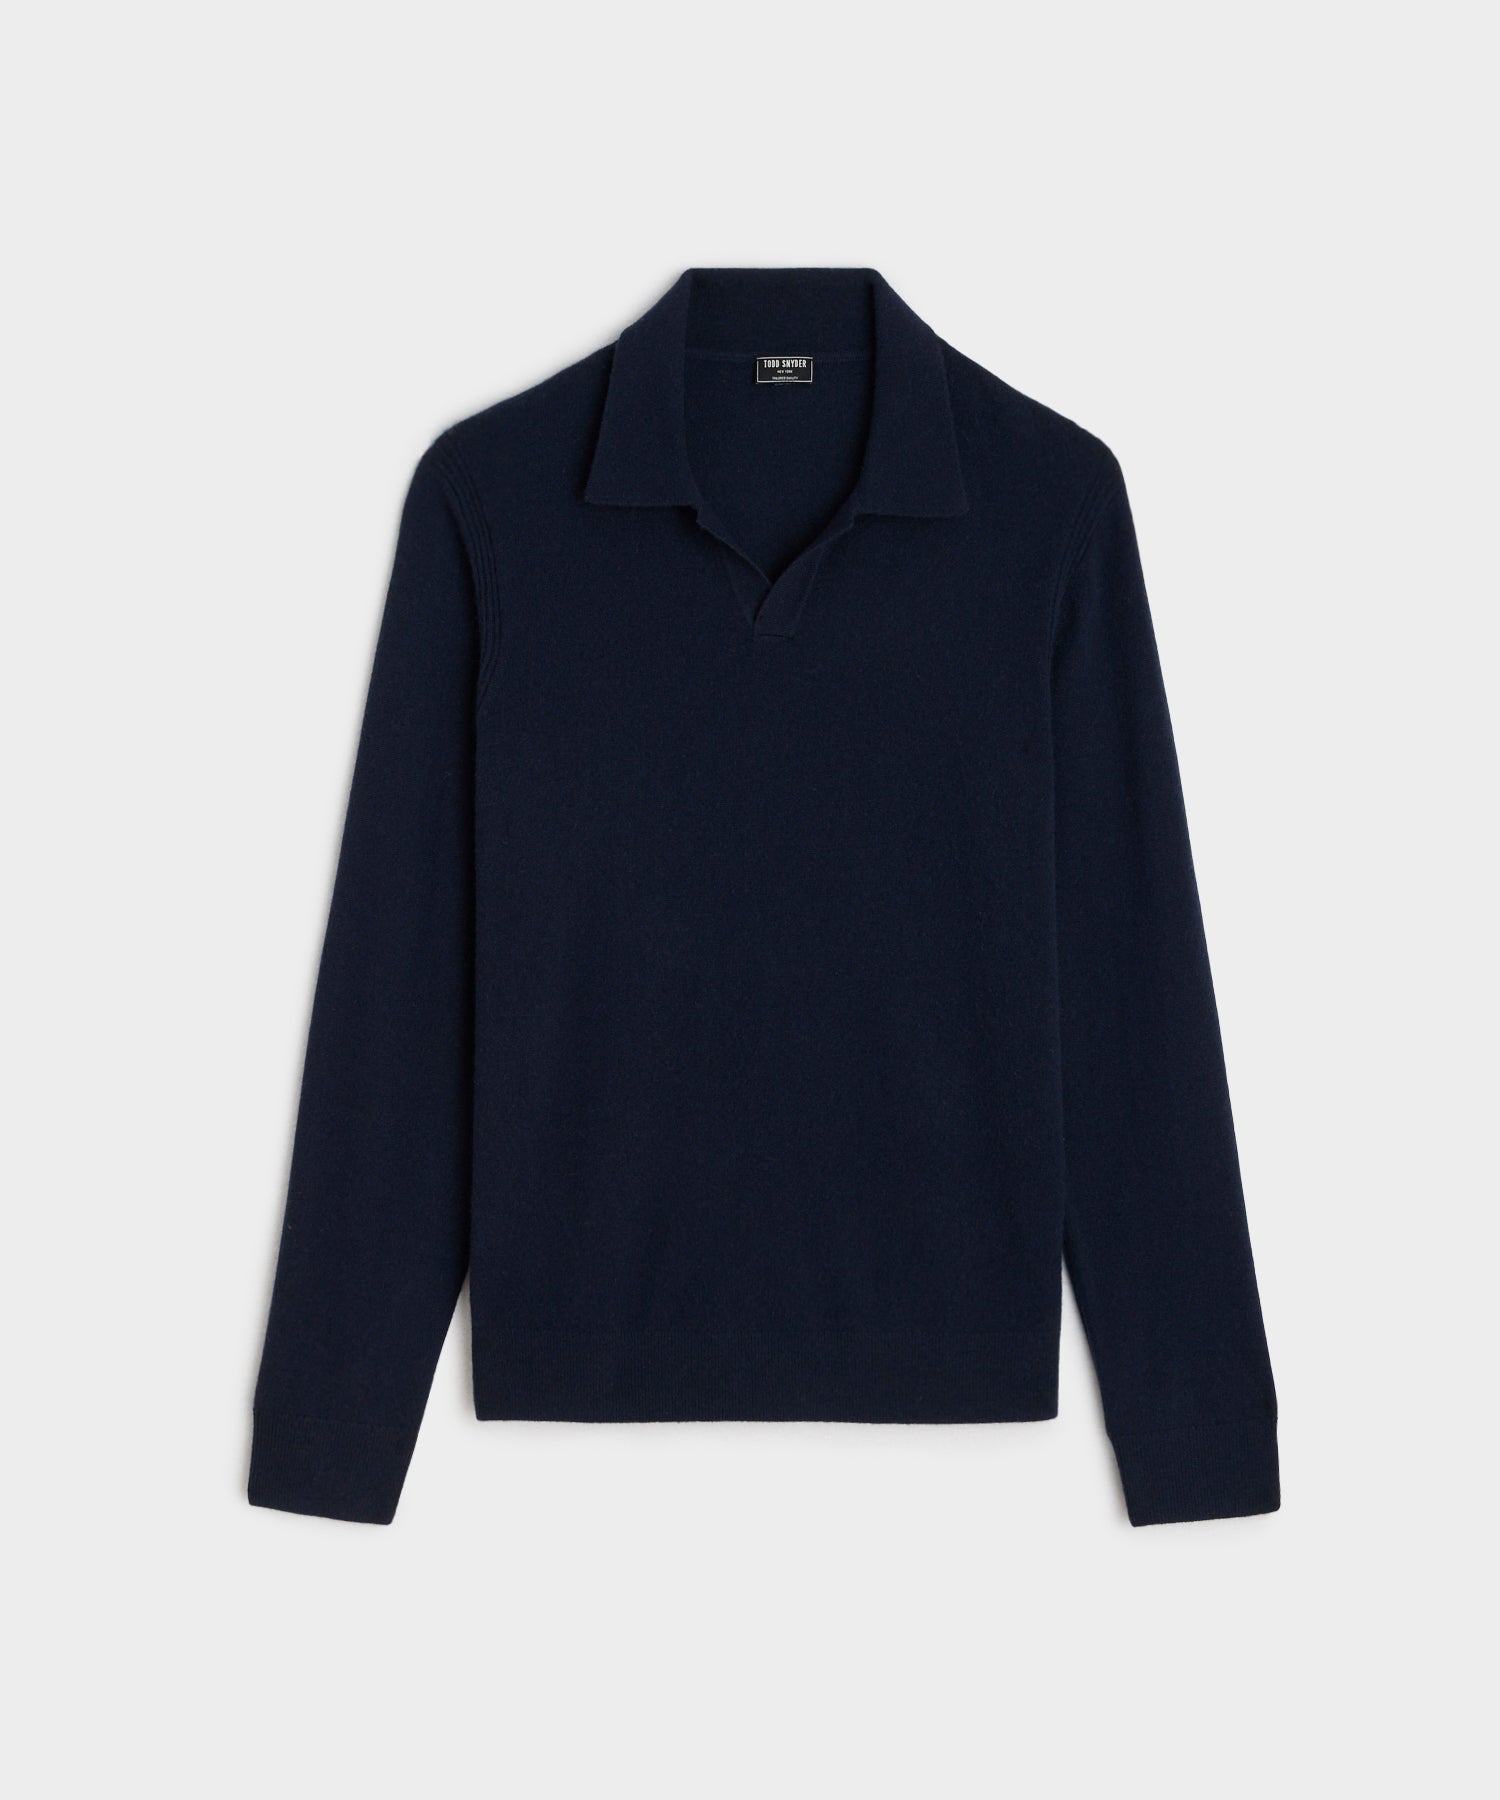 Long-Sleeve Cashmere Montauk Polo in Navy